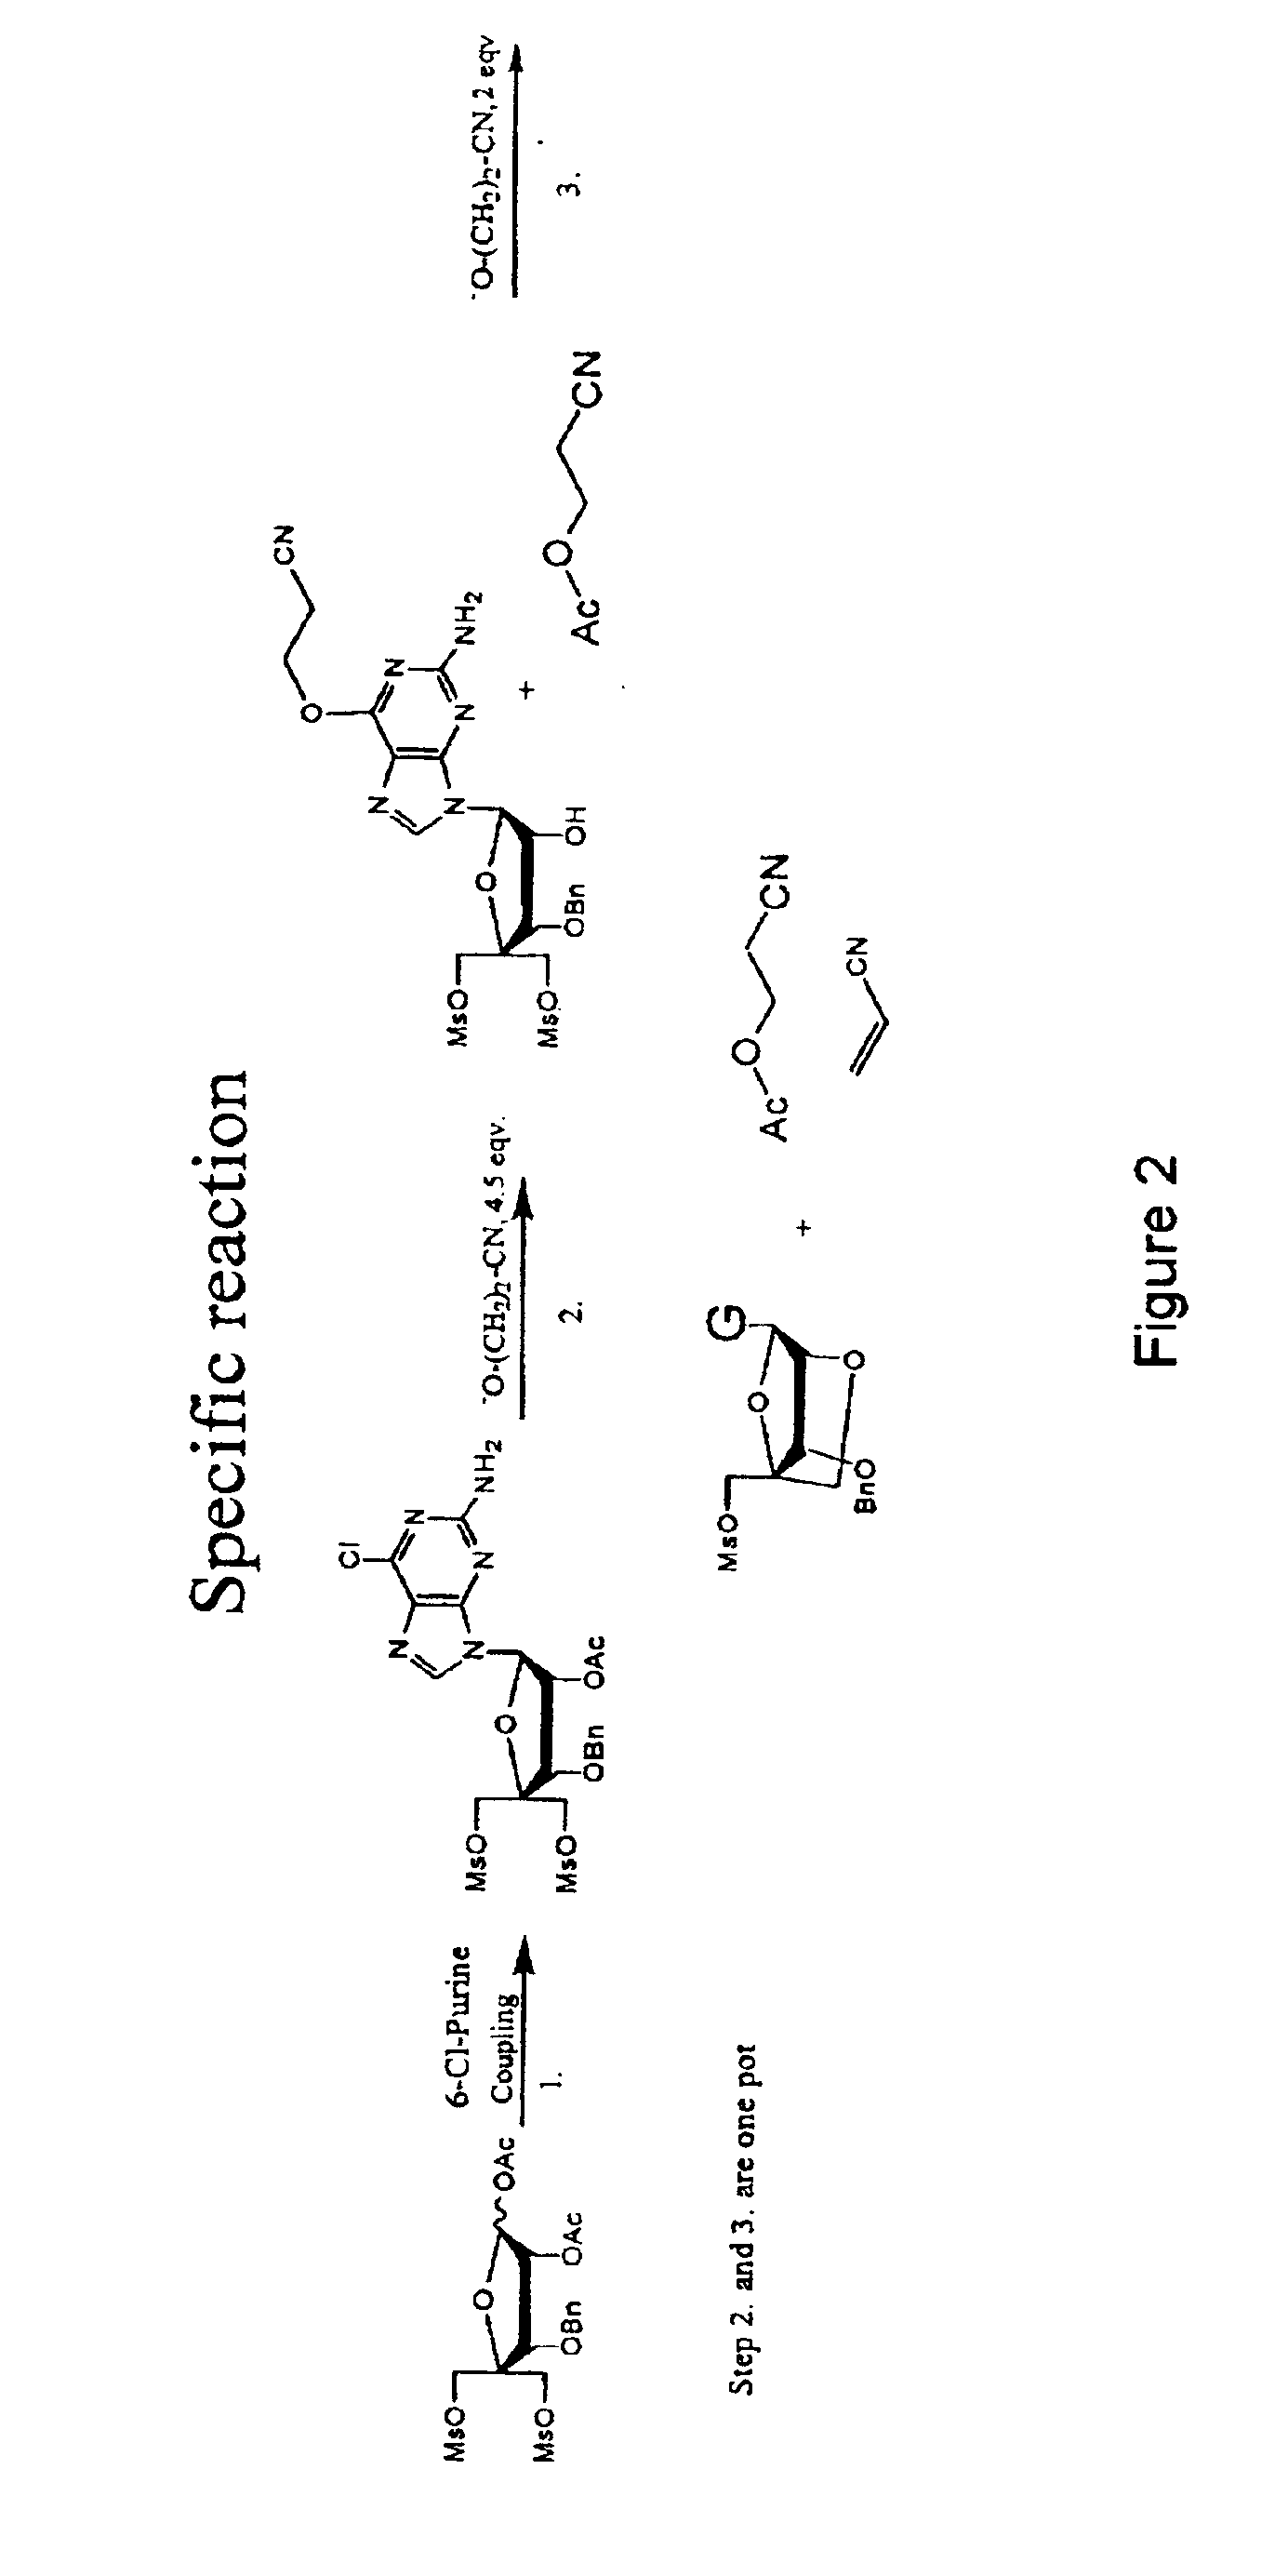 Synthesis of purine locked nucleic acid analogues